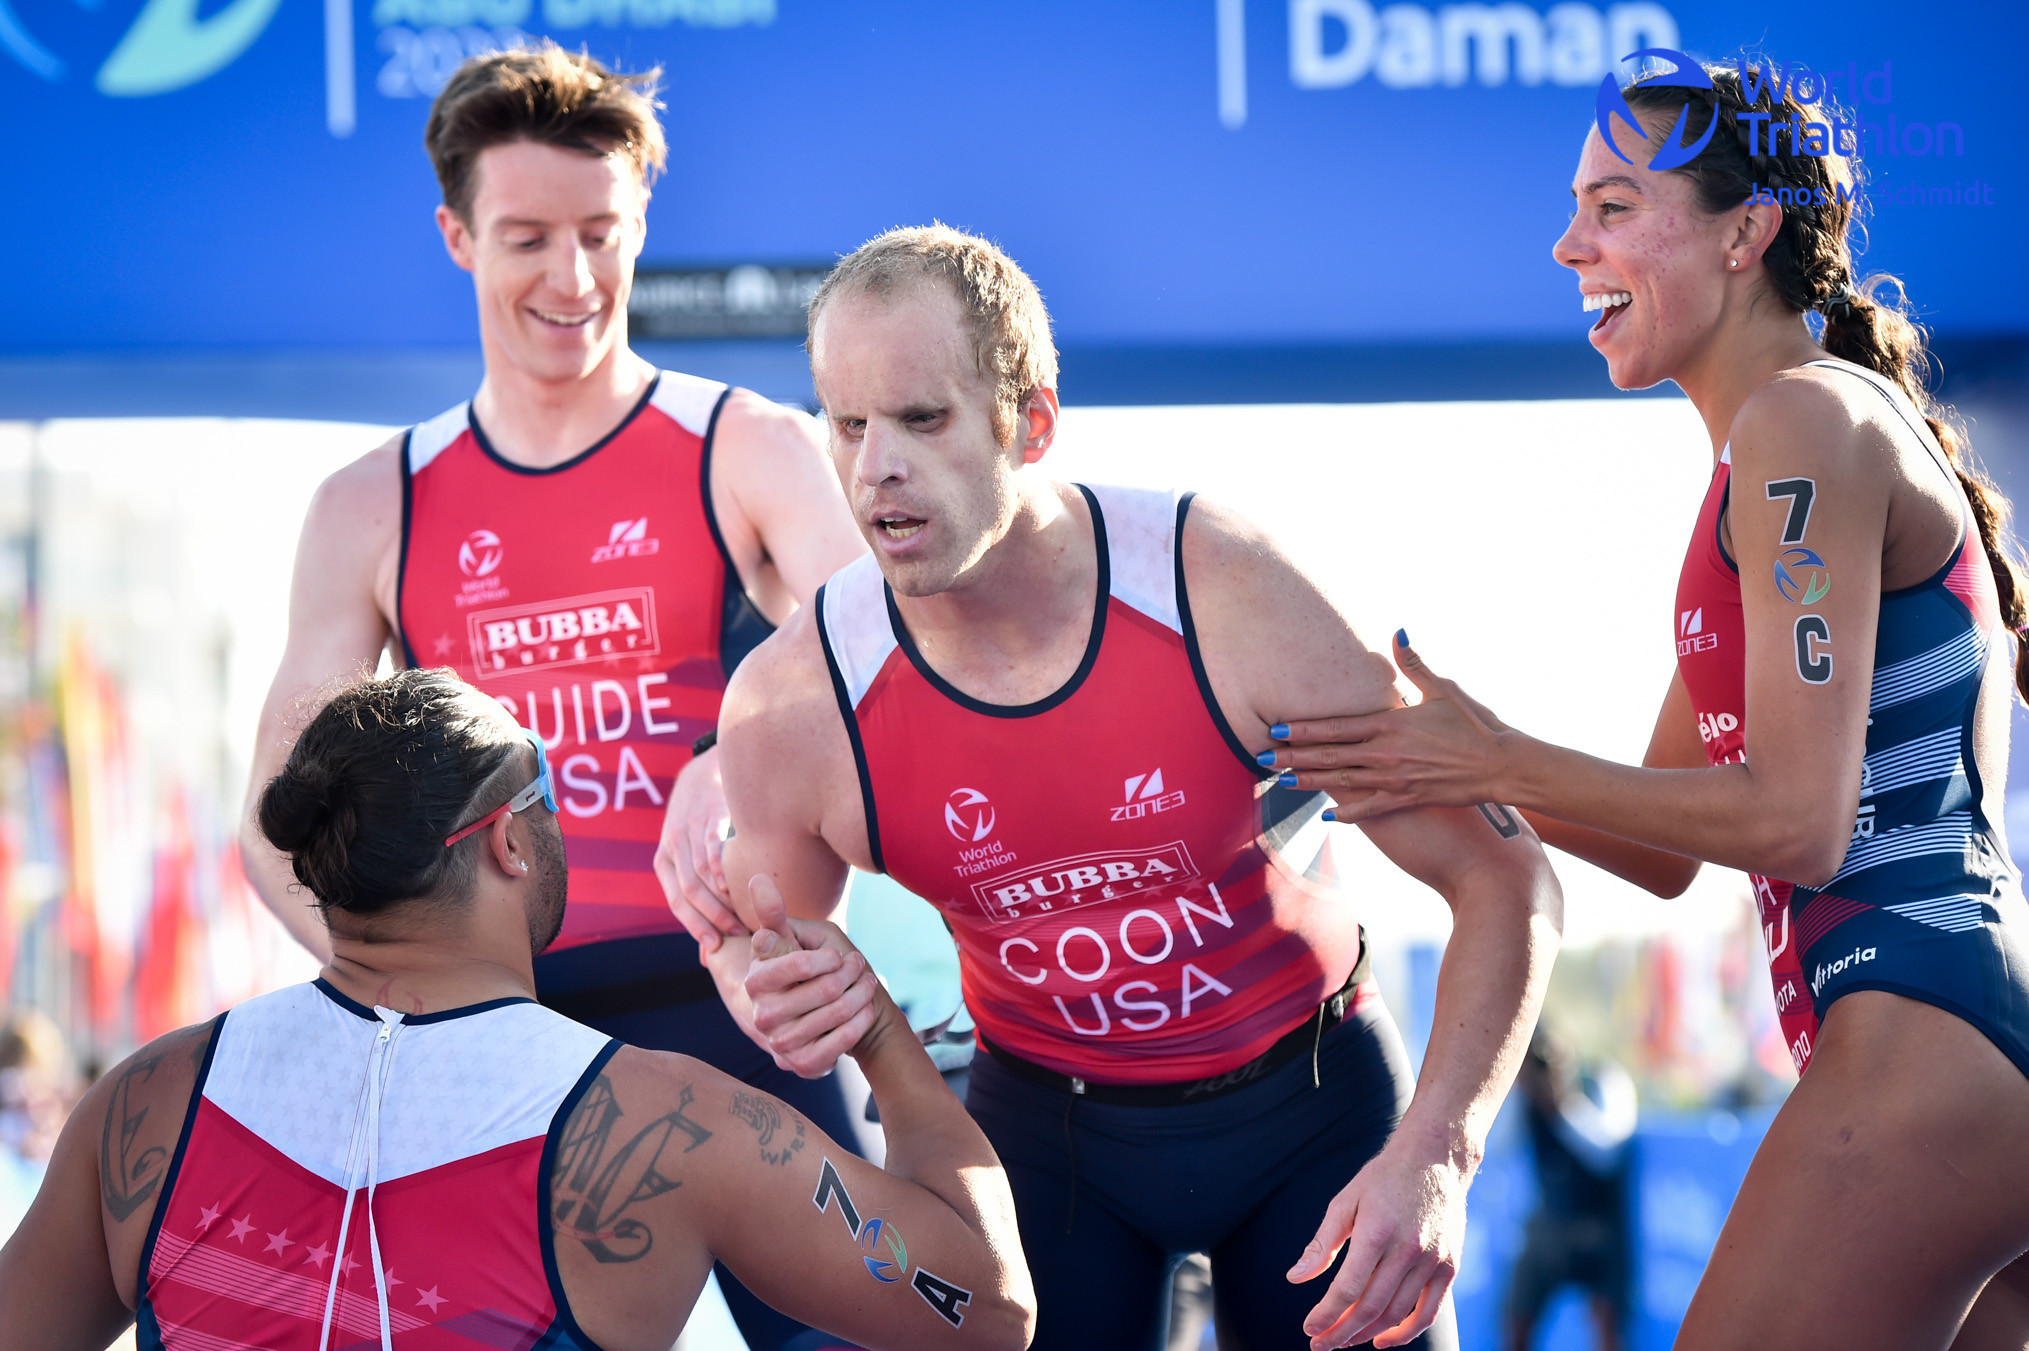 Kyle Coon, second right, raced the final leg to secure bronze for the other American team competing in the relay ©World Triathlon